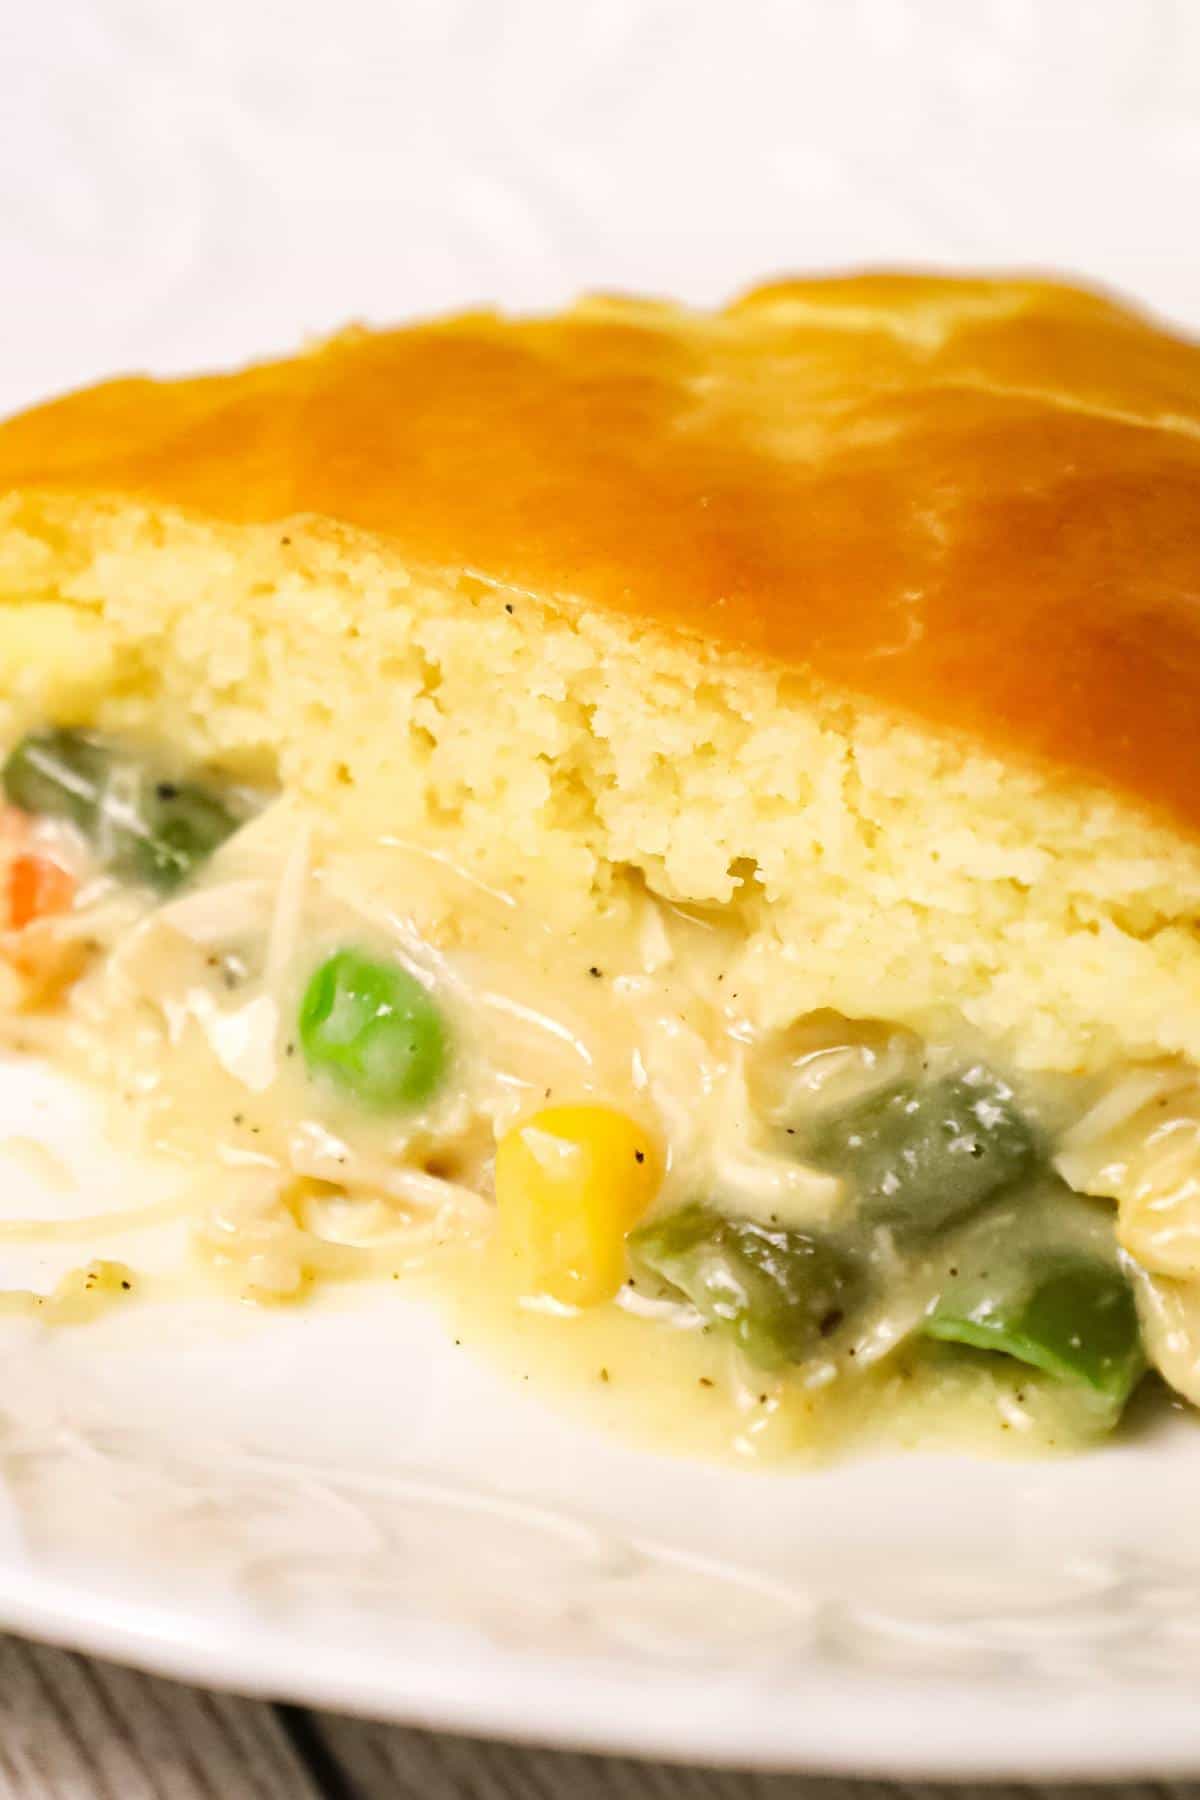 Chicken Pot Pie with Bisquick is an easy dinner recipe using precooked chicken, frozen mixed veggies and cream of chicken soup all topped with Bisquick.